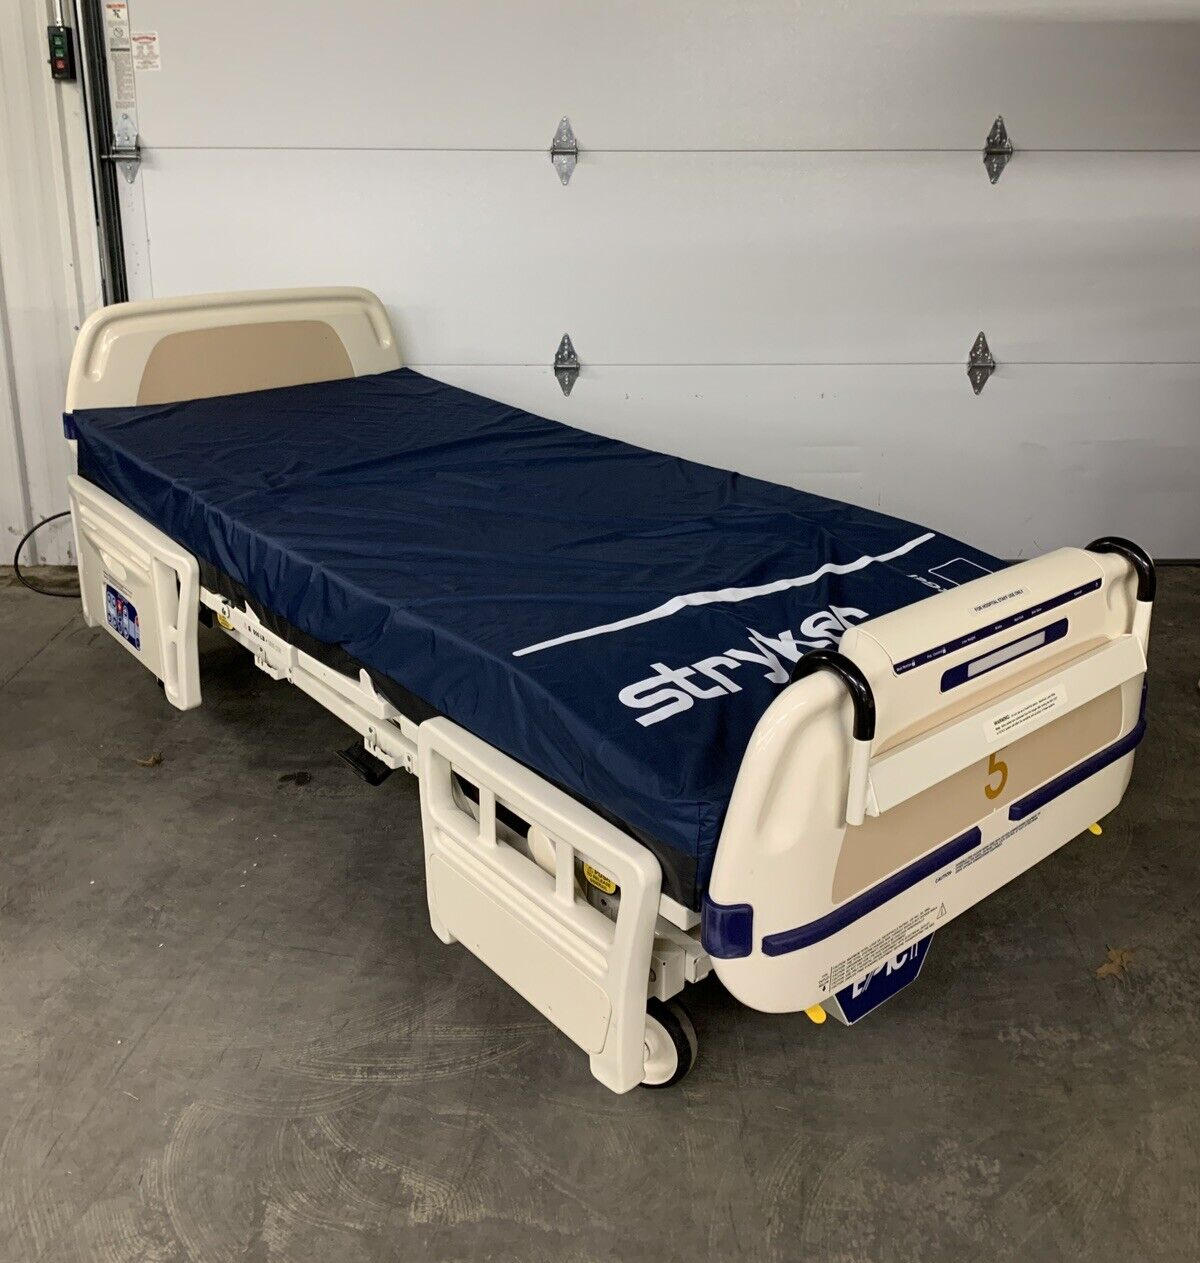 Stryker Epic Bed 2030 Critical Care Hospital Bed Comfort Gel Mattress For Parts